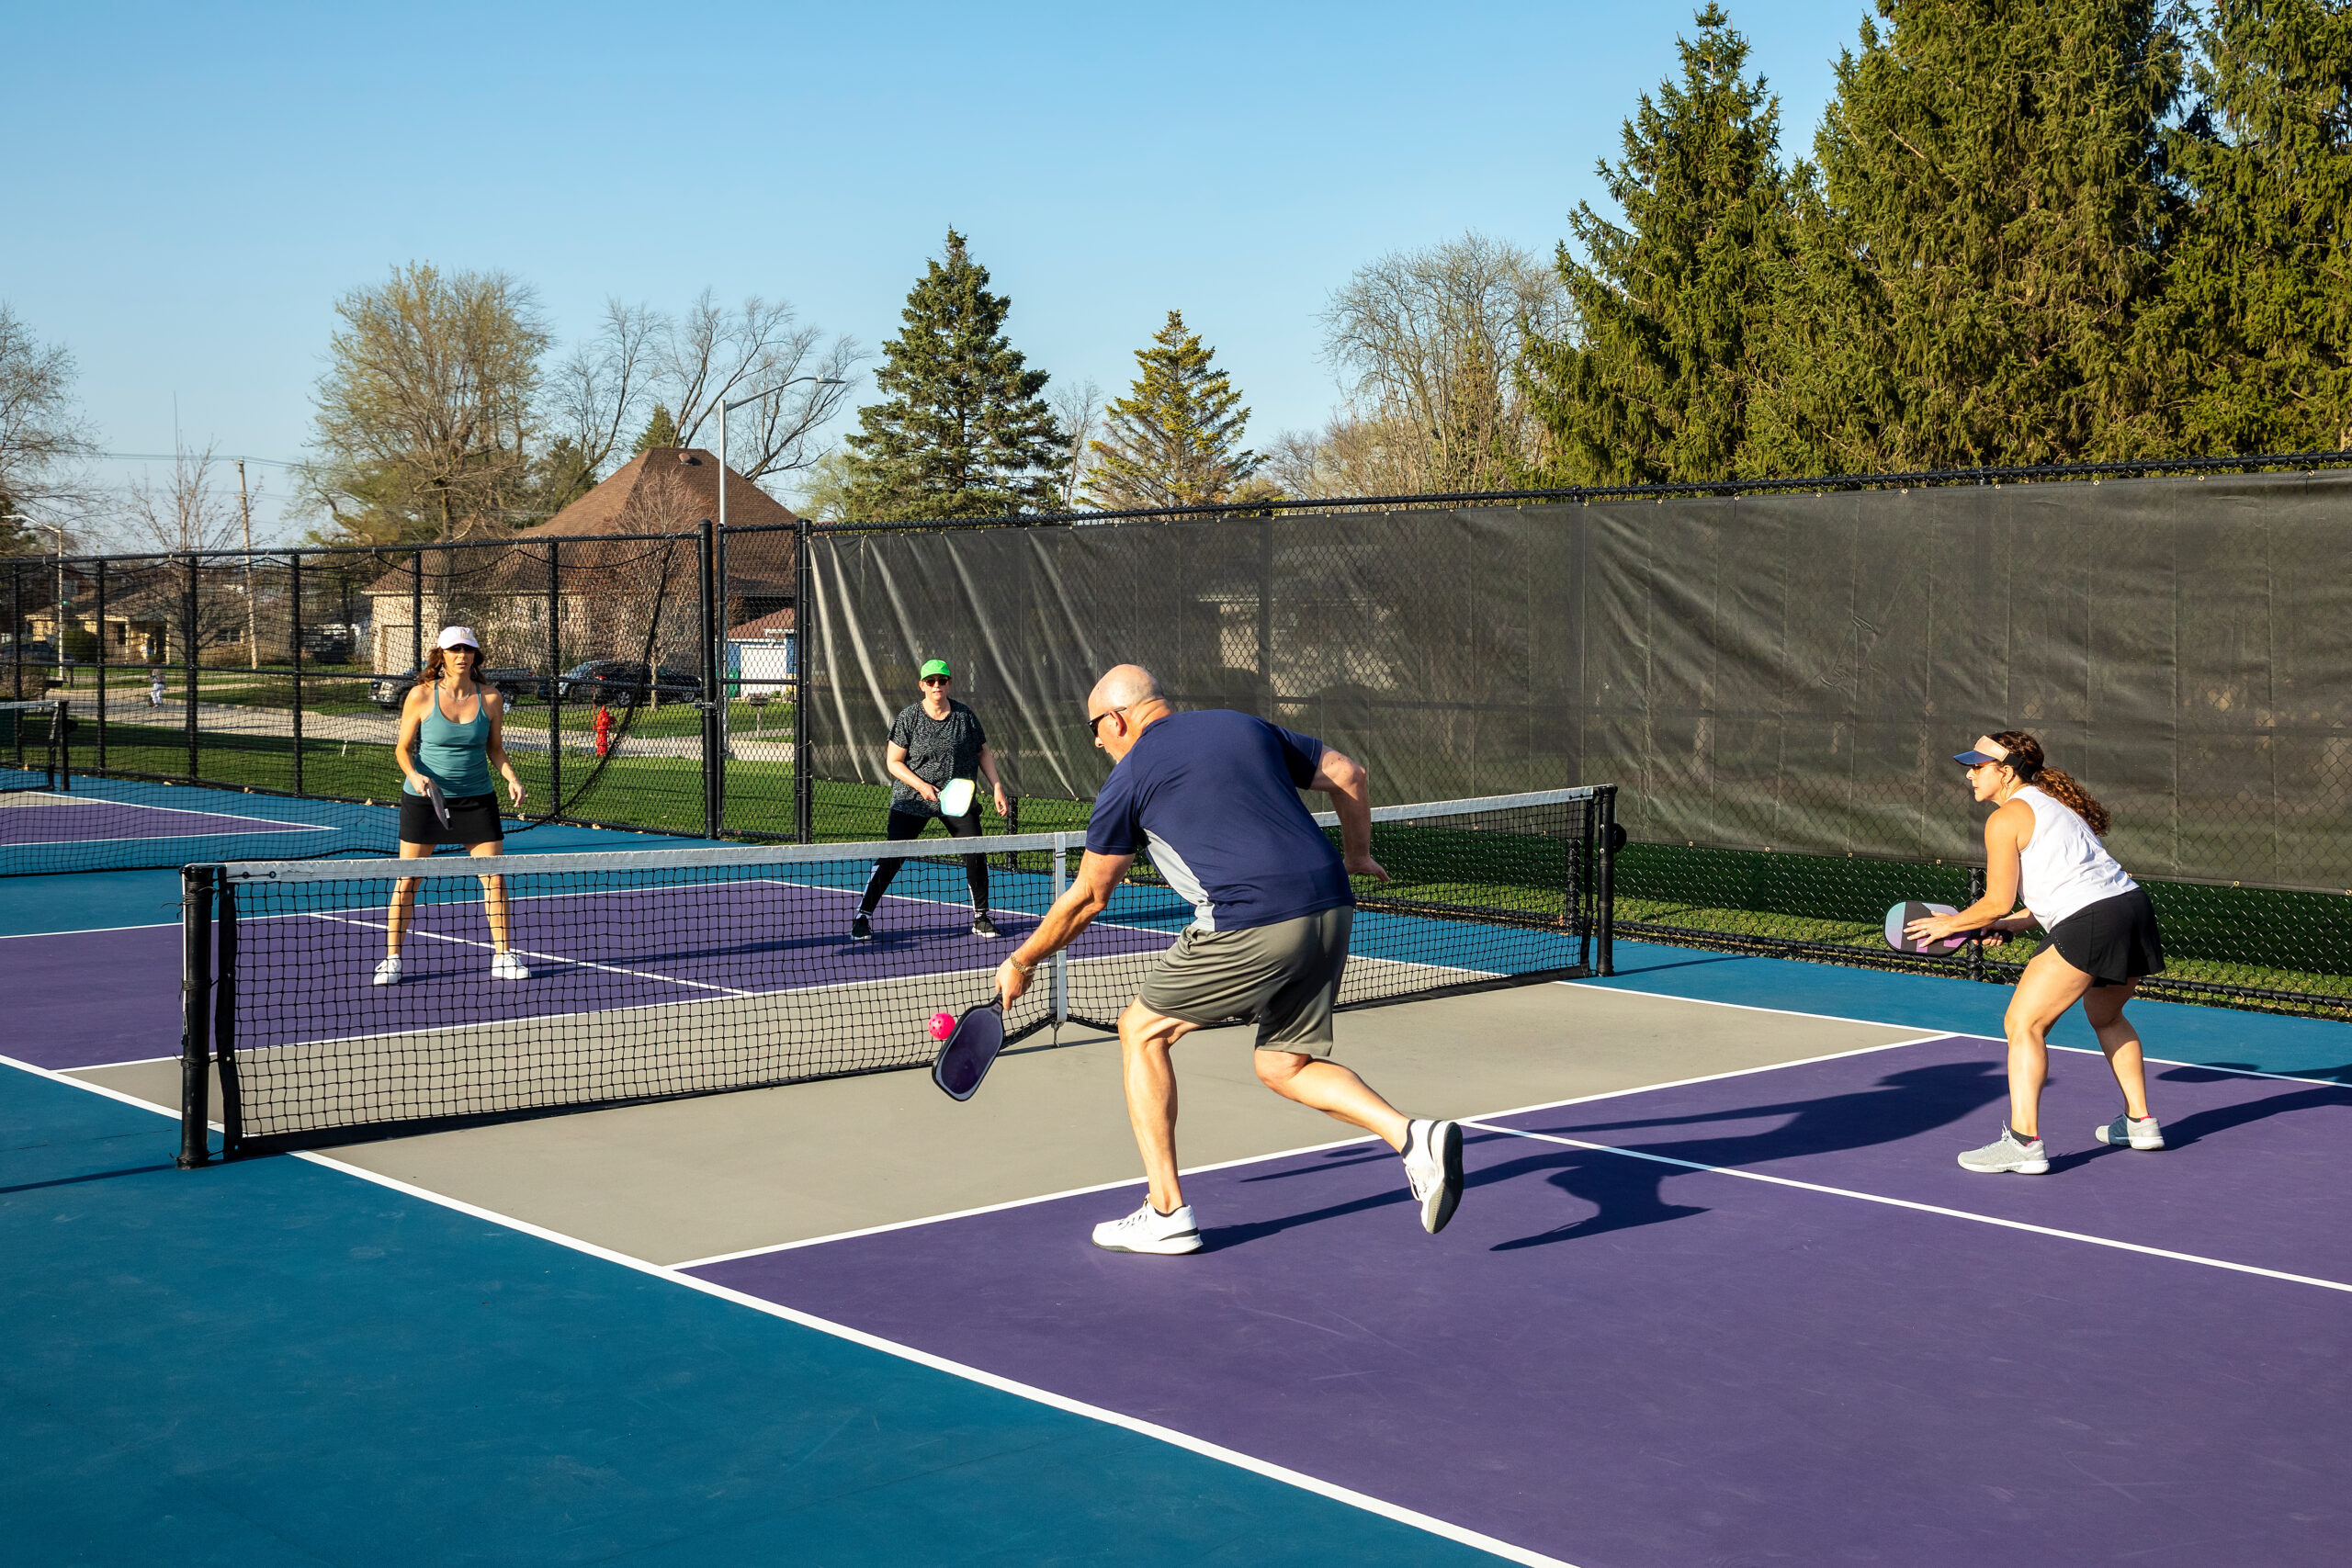 A male player returns a volley at the net on a dedicated pickleball court at a public park.